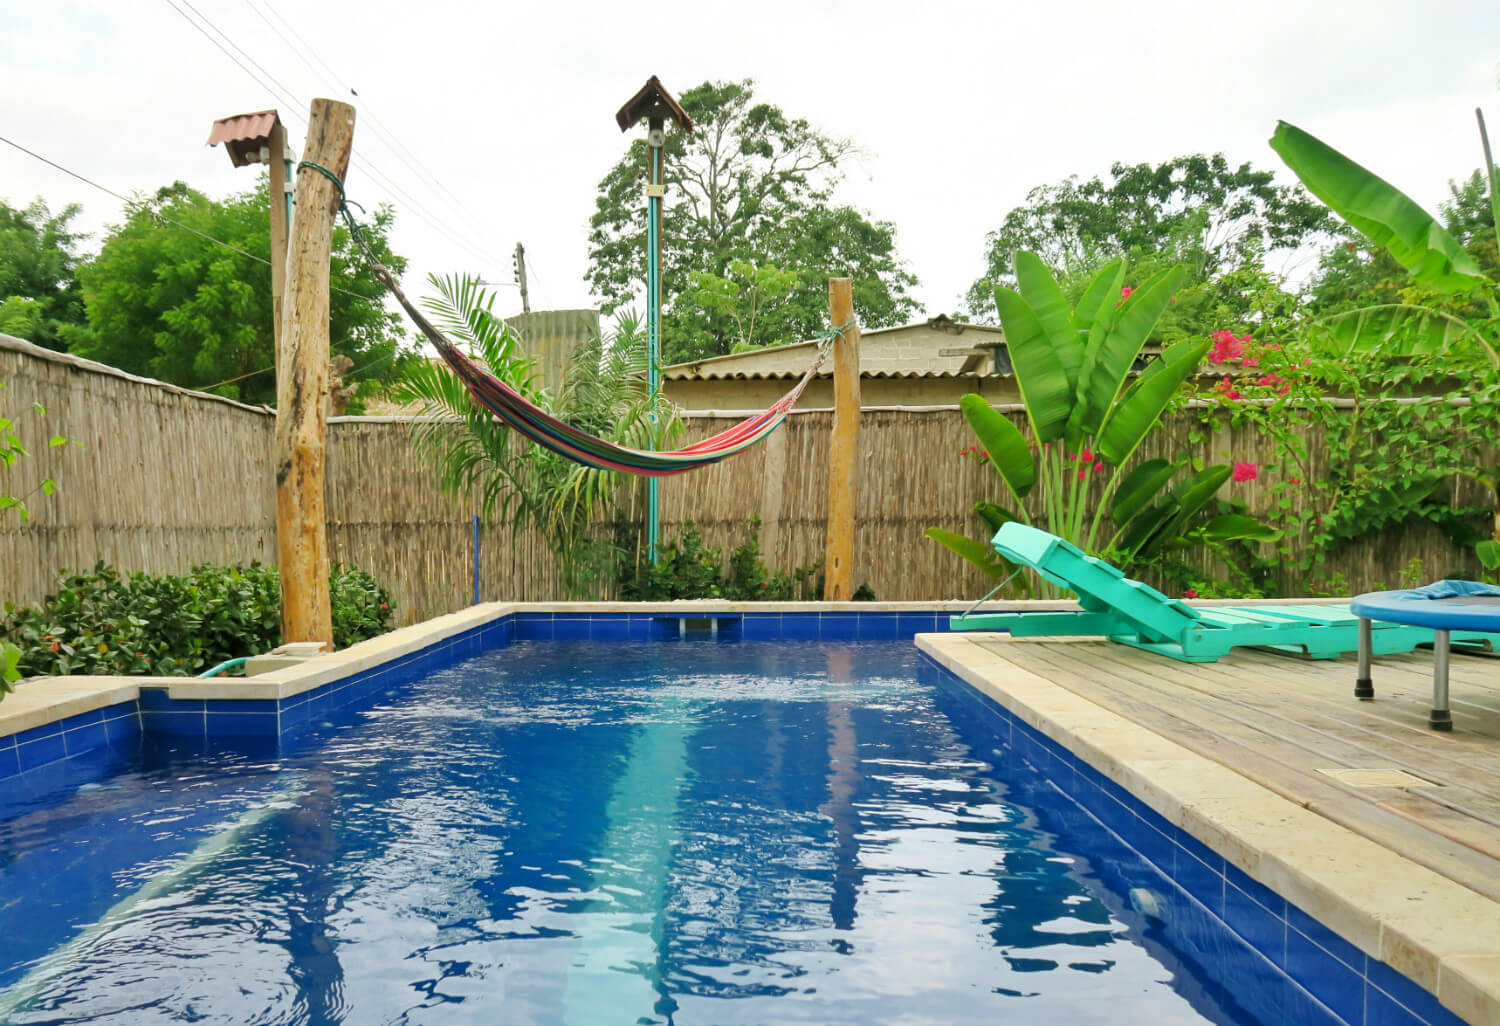 tribe-guesthouse-palomino-colombia-pool